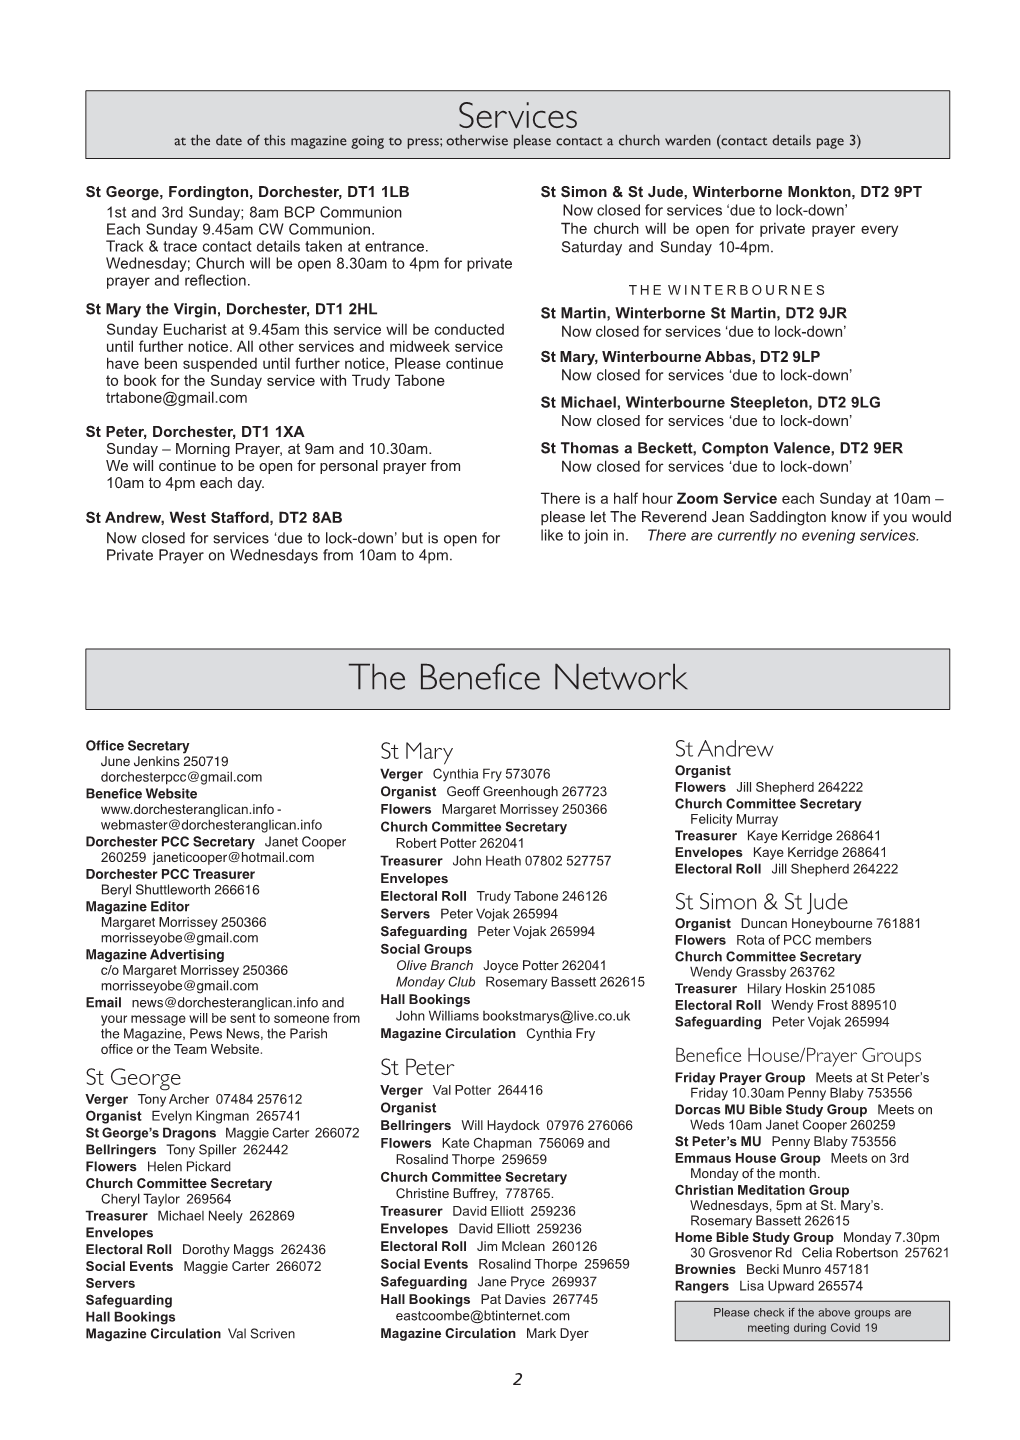 The Benefice Network Services